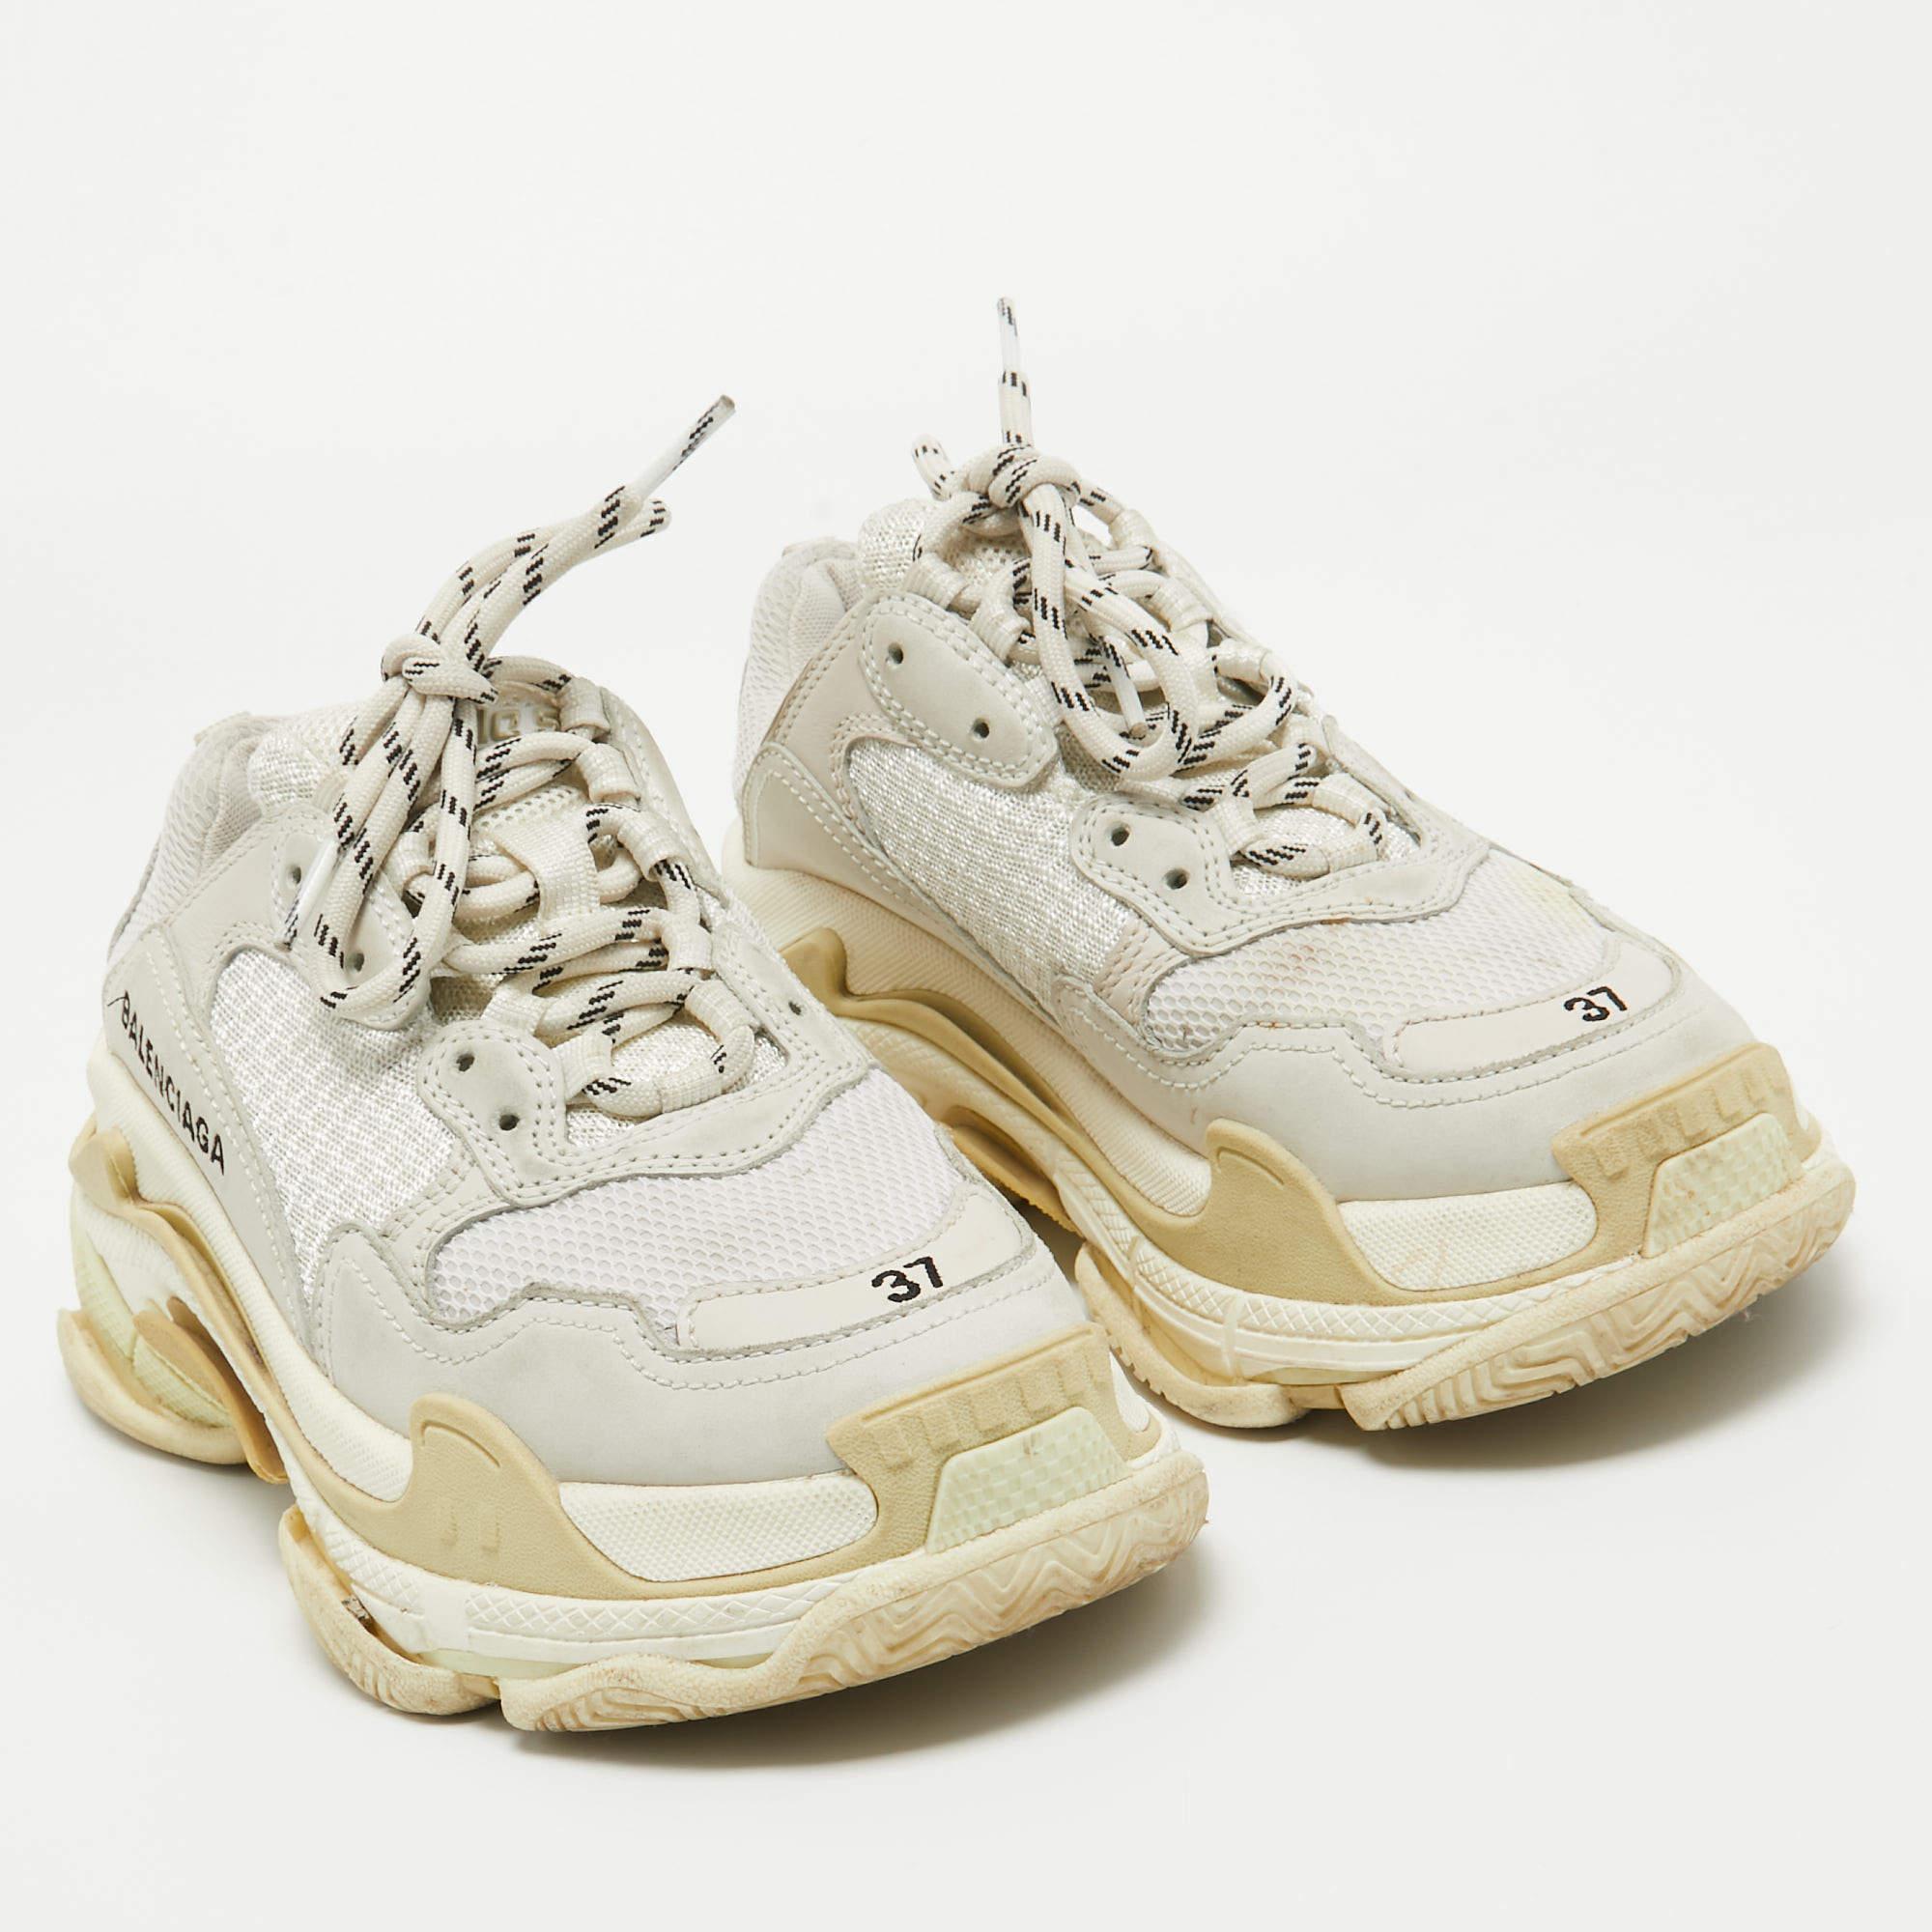 Balenciaga White/Grey Mesh and Leather Triple S Low Top Sneakers Size 37 In Good Condition For Sale In Dubai, Al Qouz 2